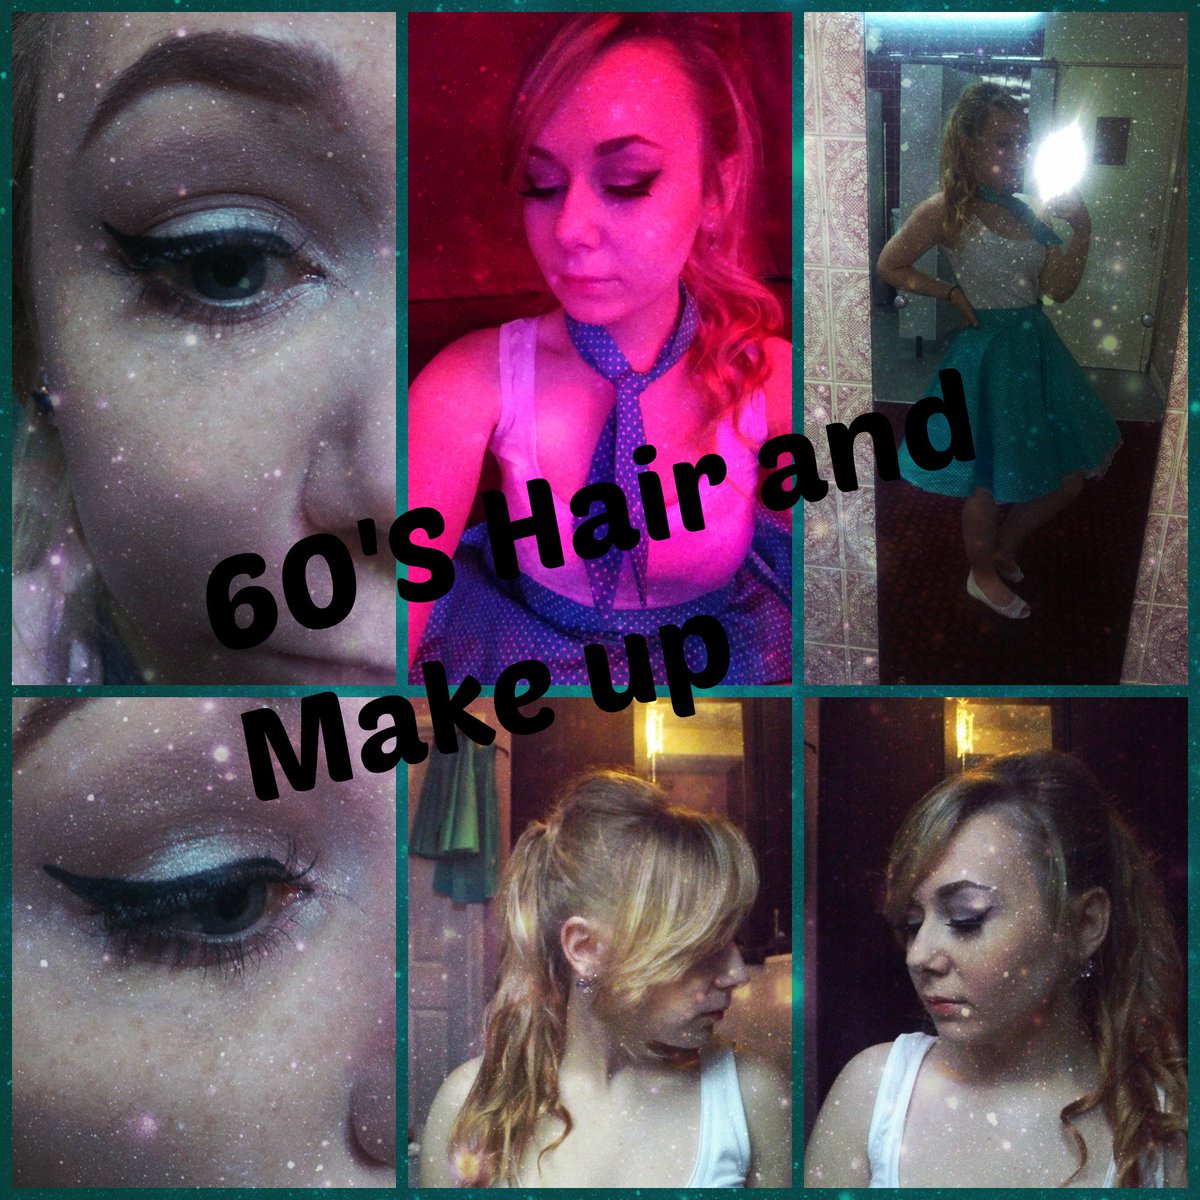 New video will be uploaded shortly! #Excited #BeautyYoutuber #Halloween #60sRockandroll @beauty_tips_2